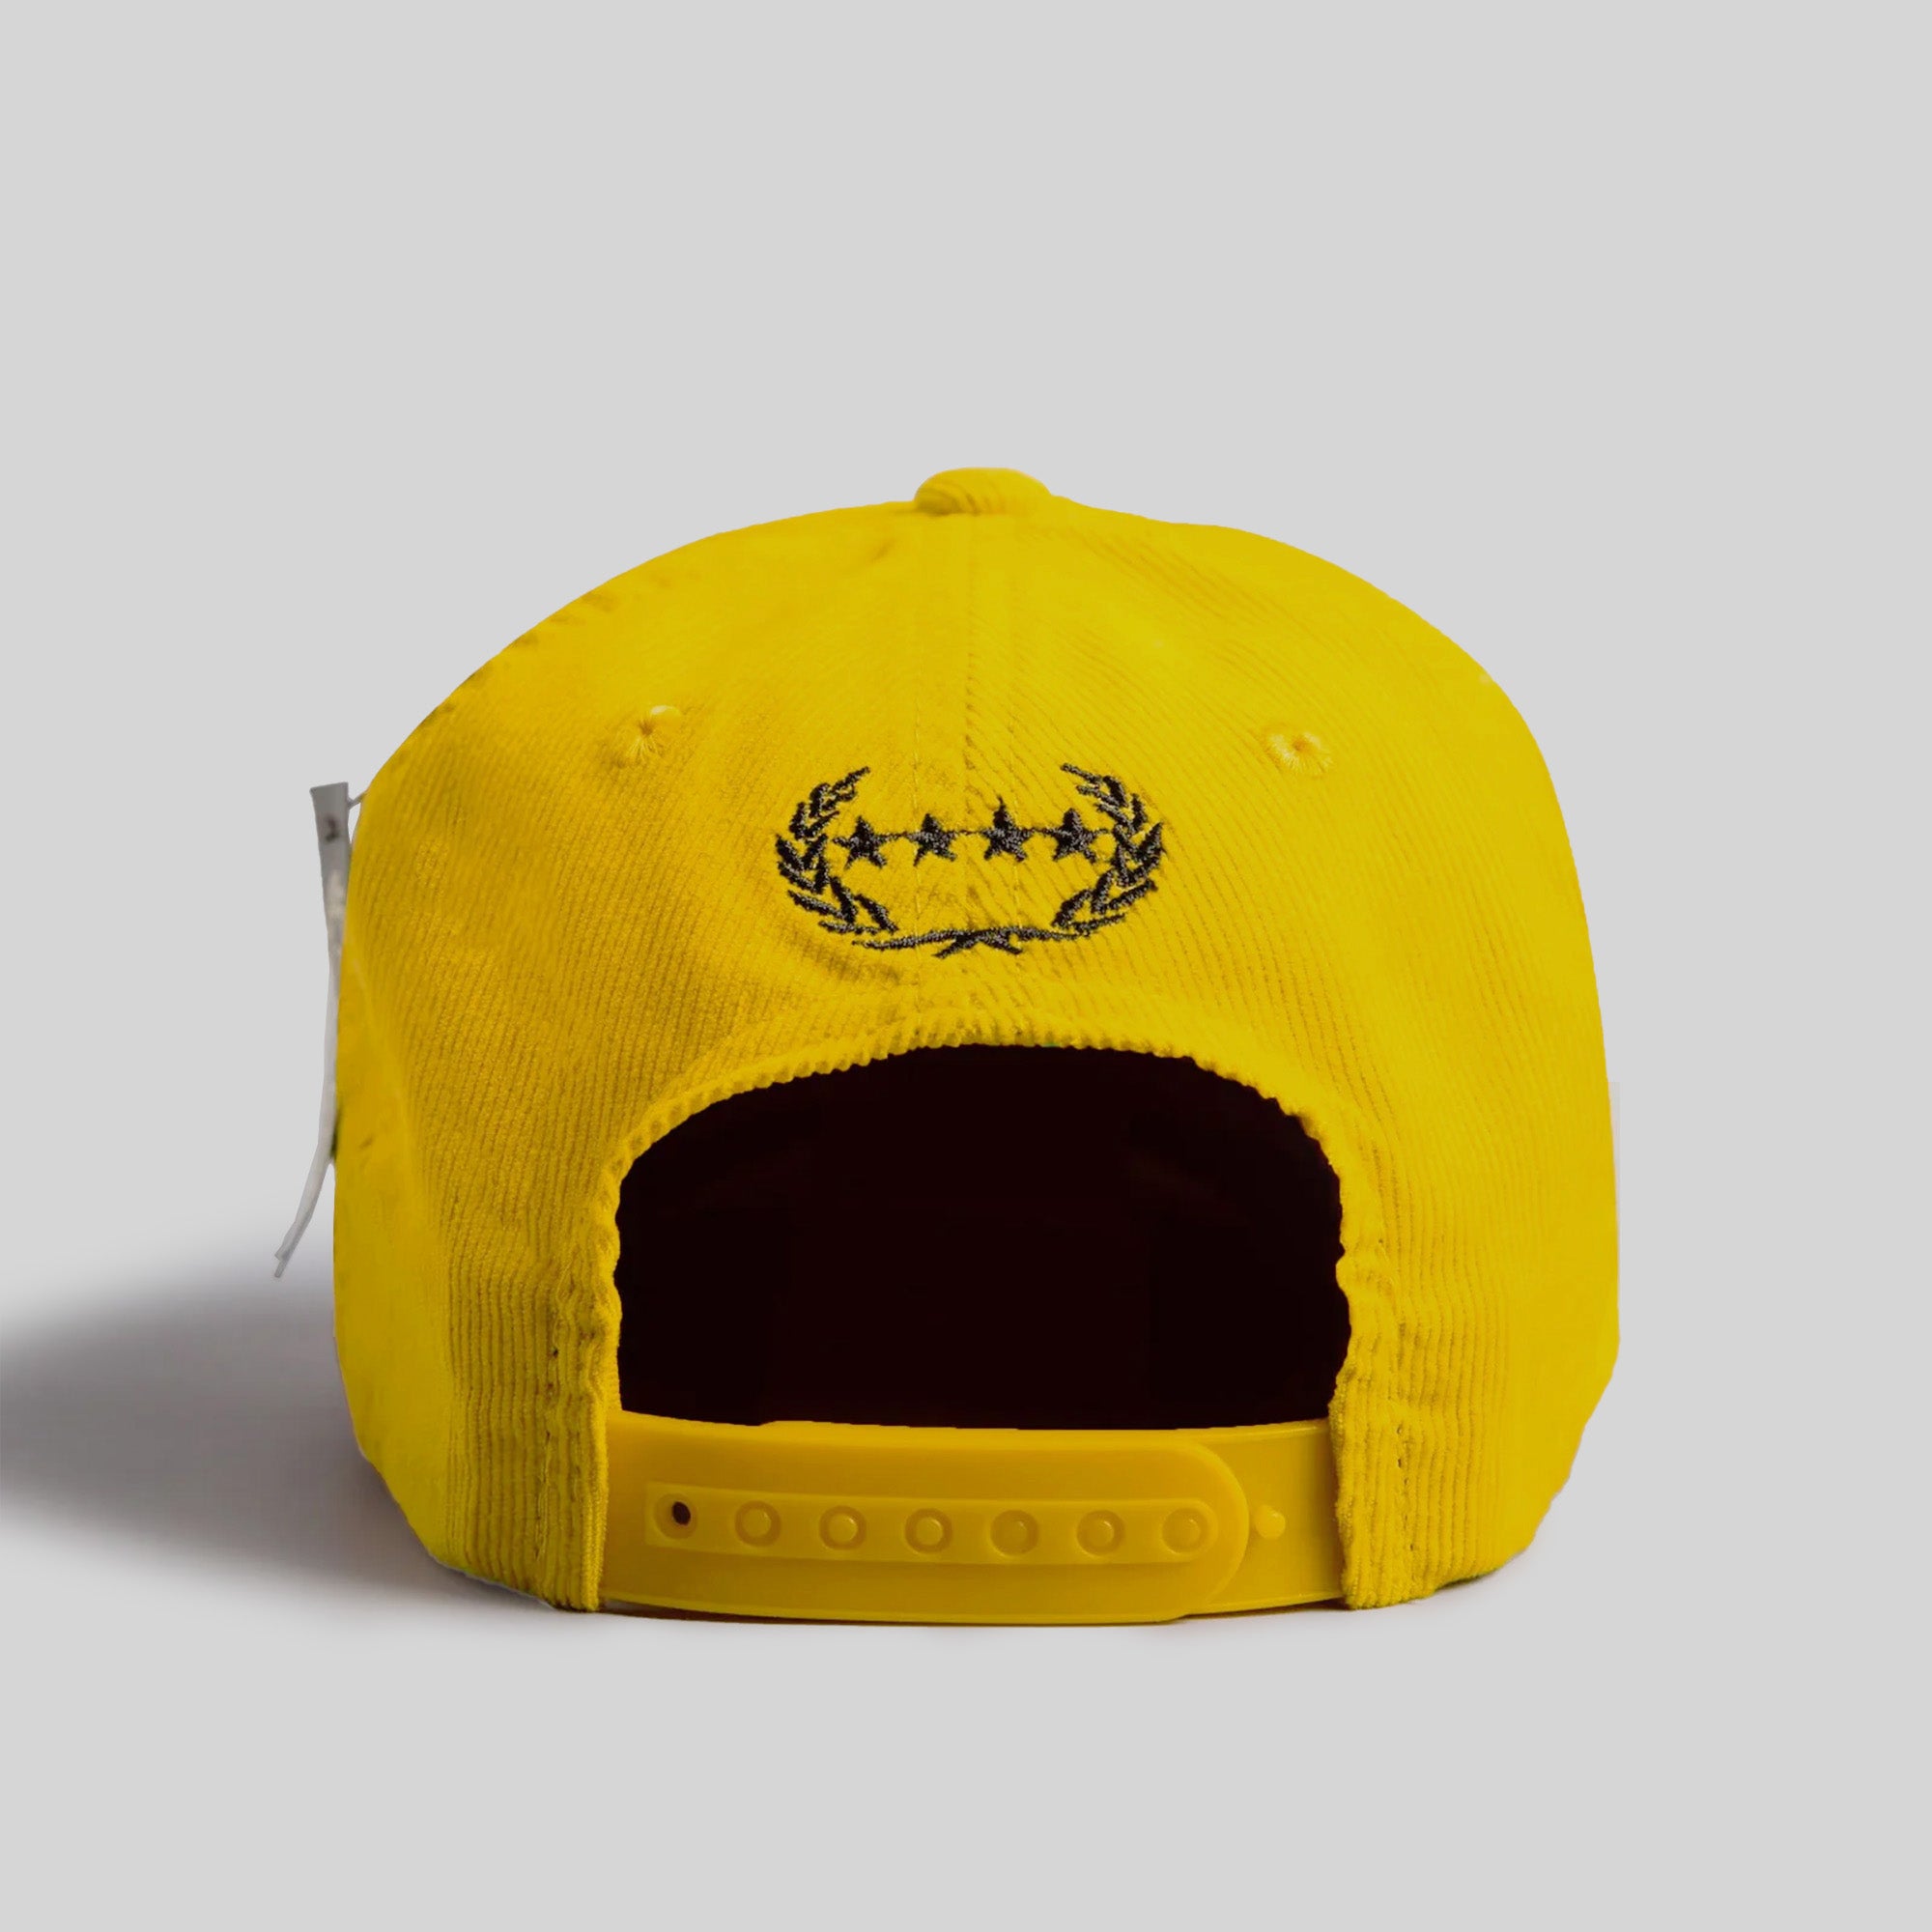 MIND YOUR BUSINESS YELLOW GOLD CORDUROY TRUCKER HAT